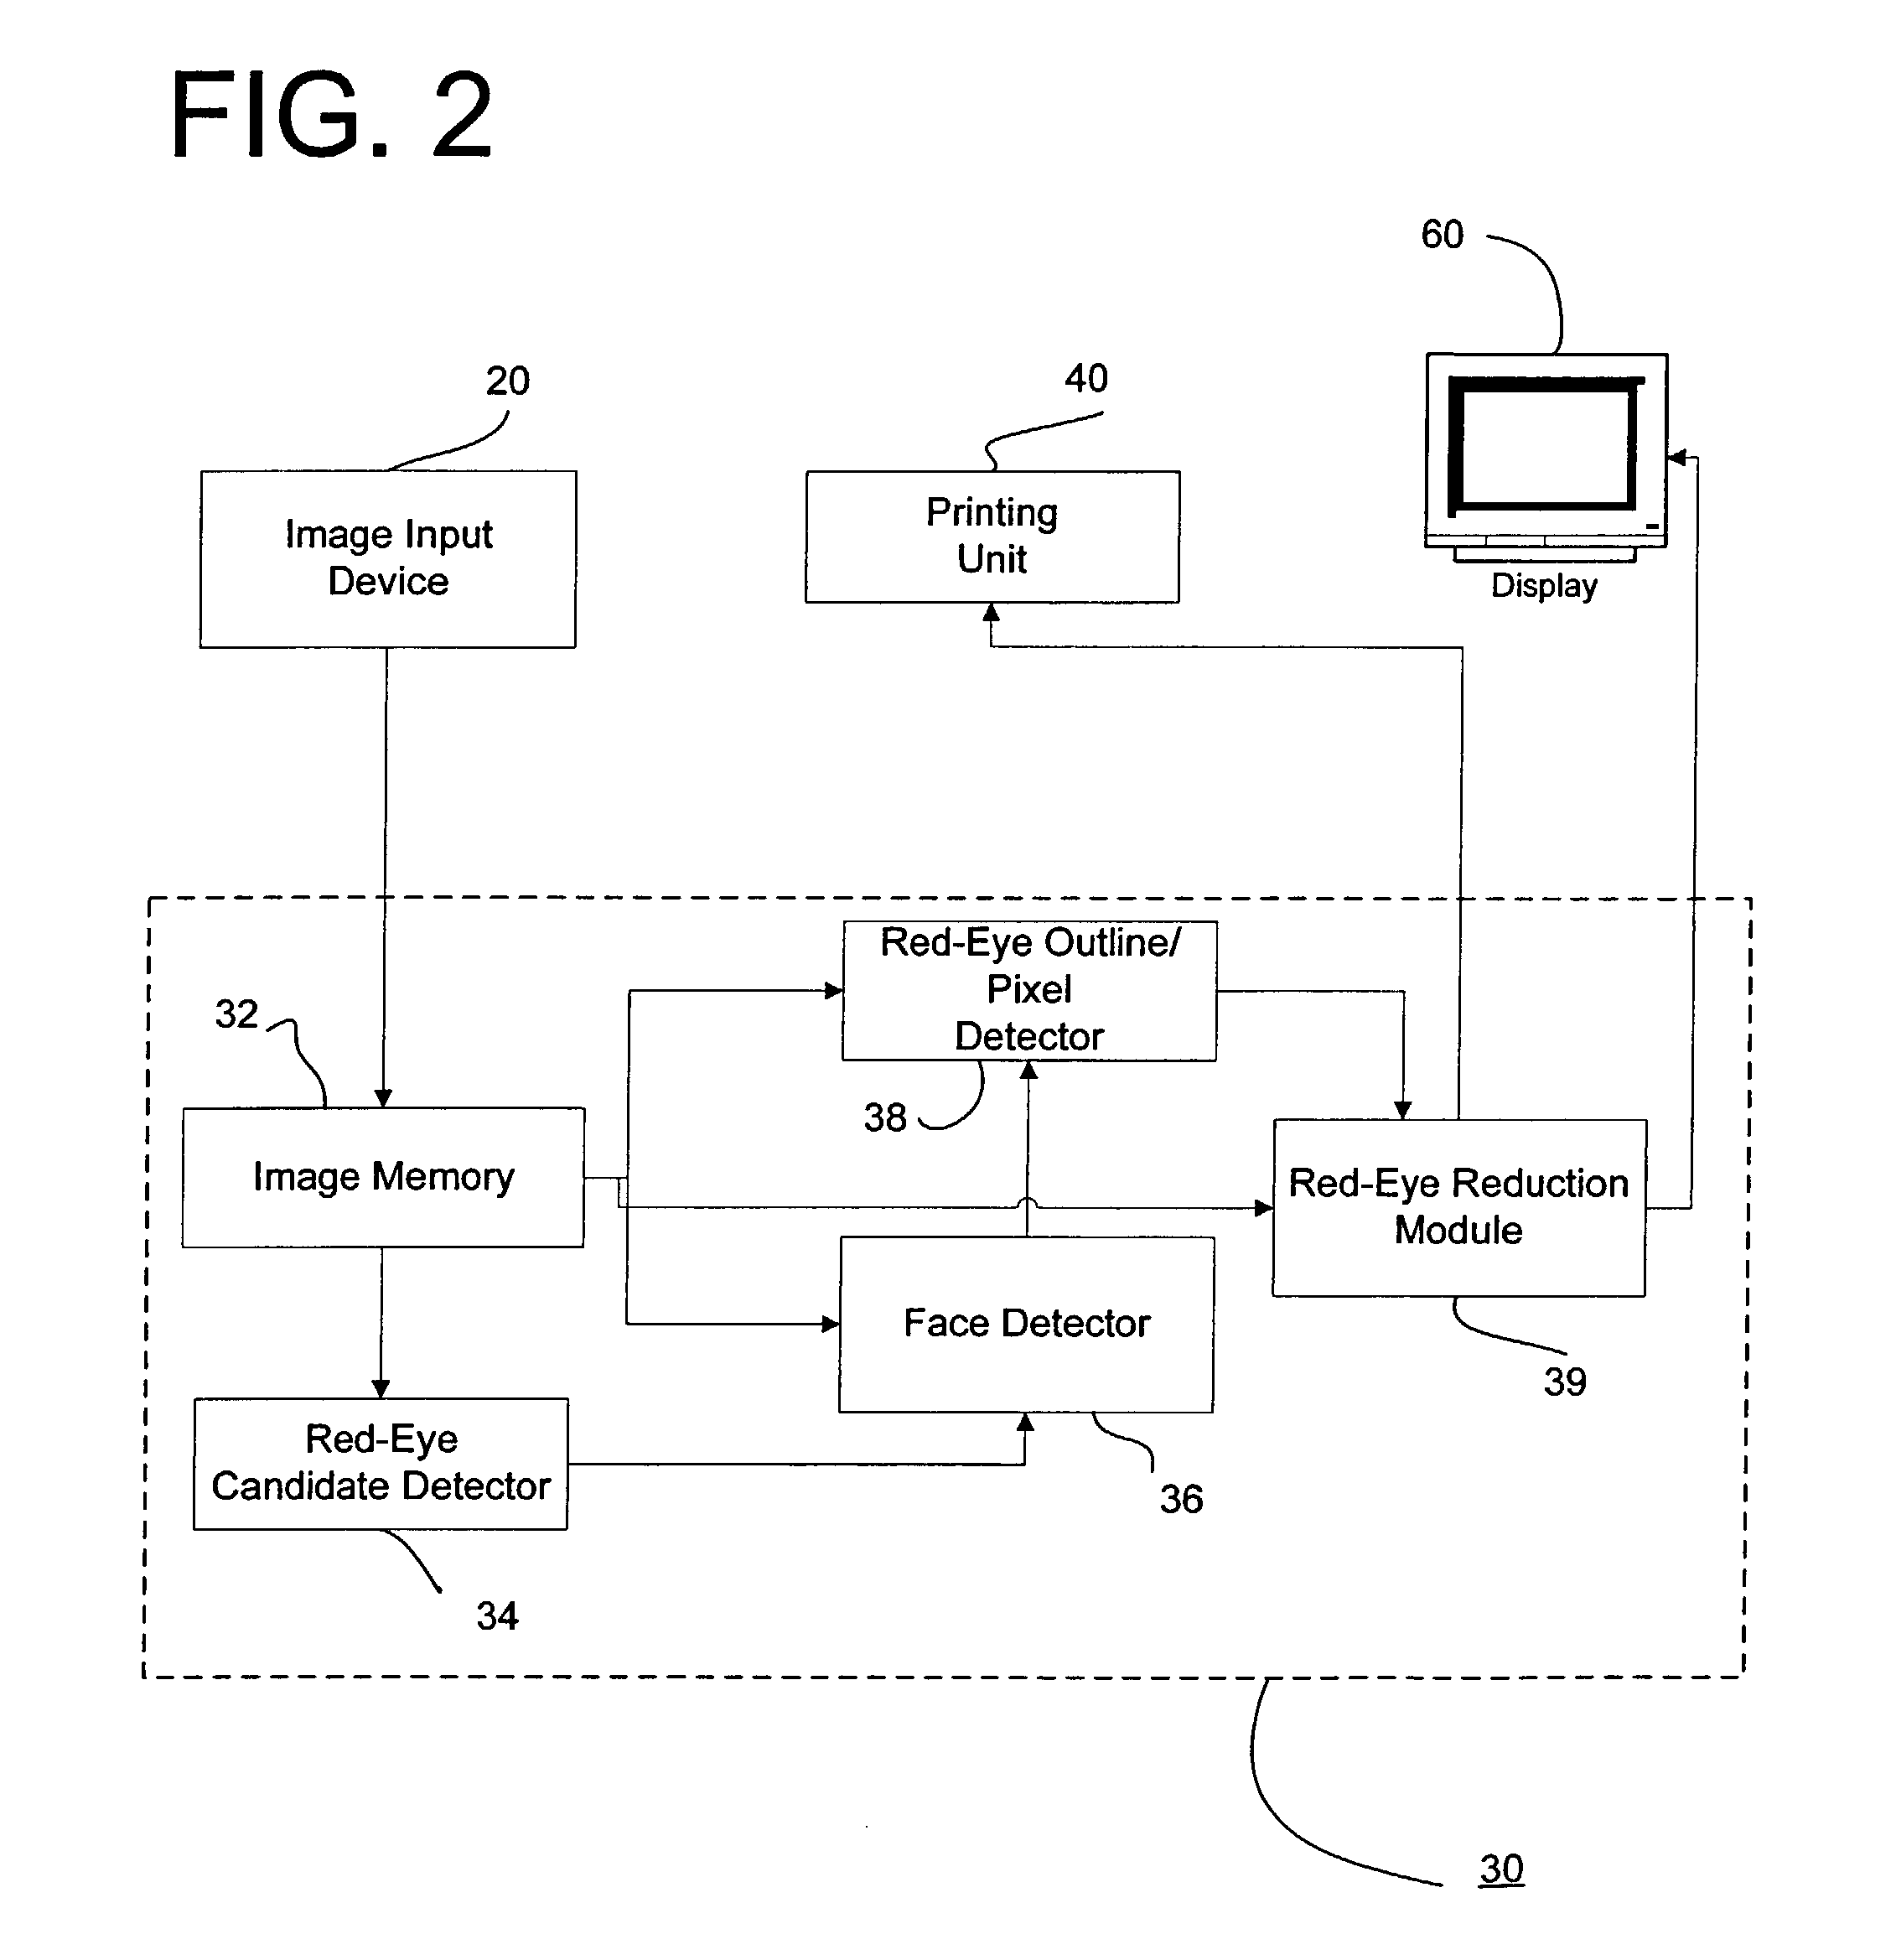 Method and apparatus for red-eye detection